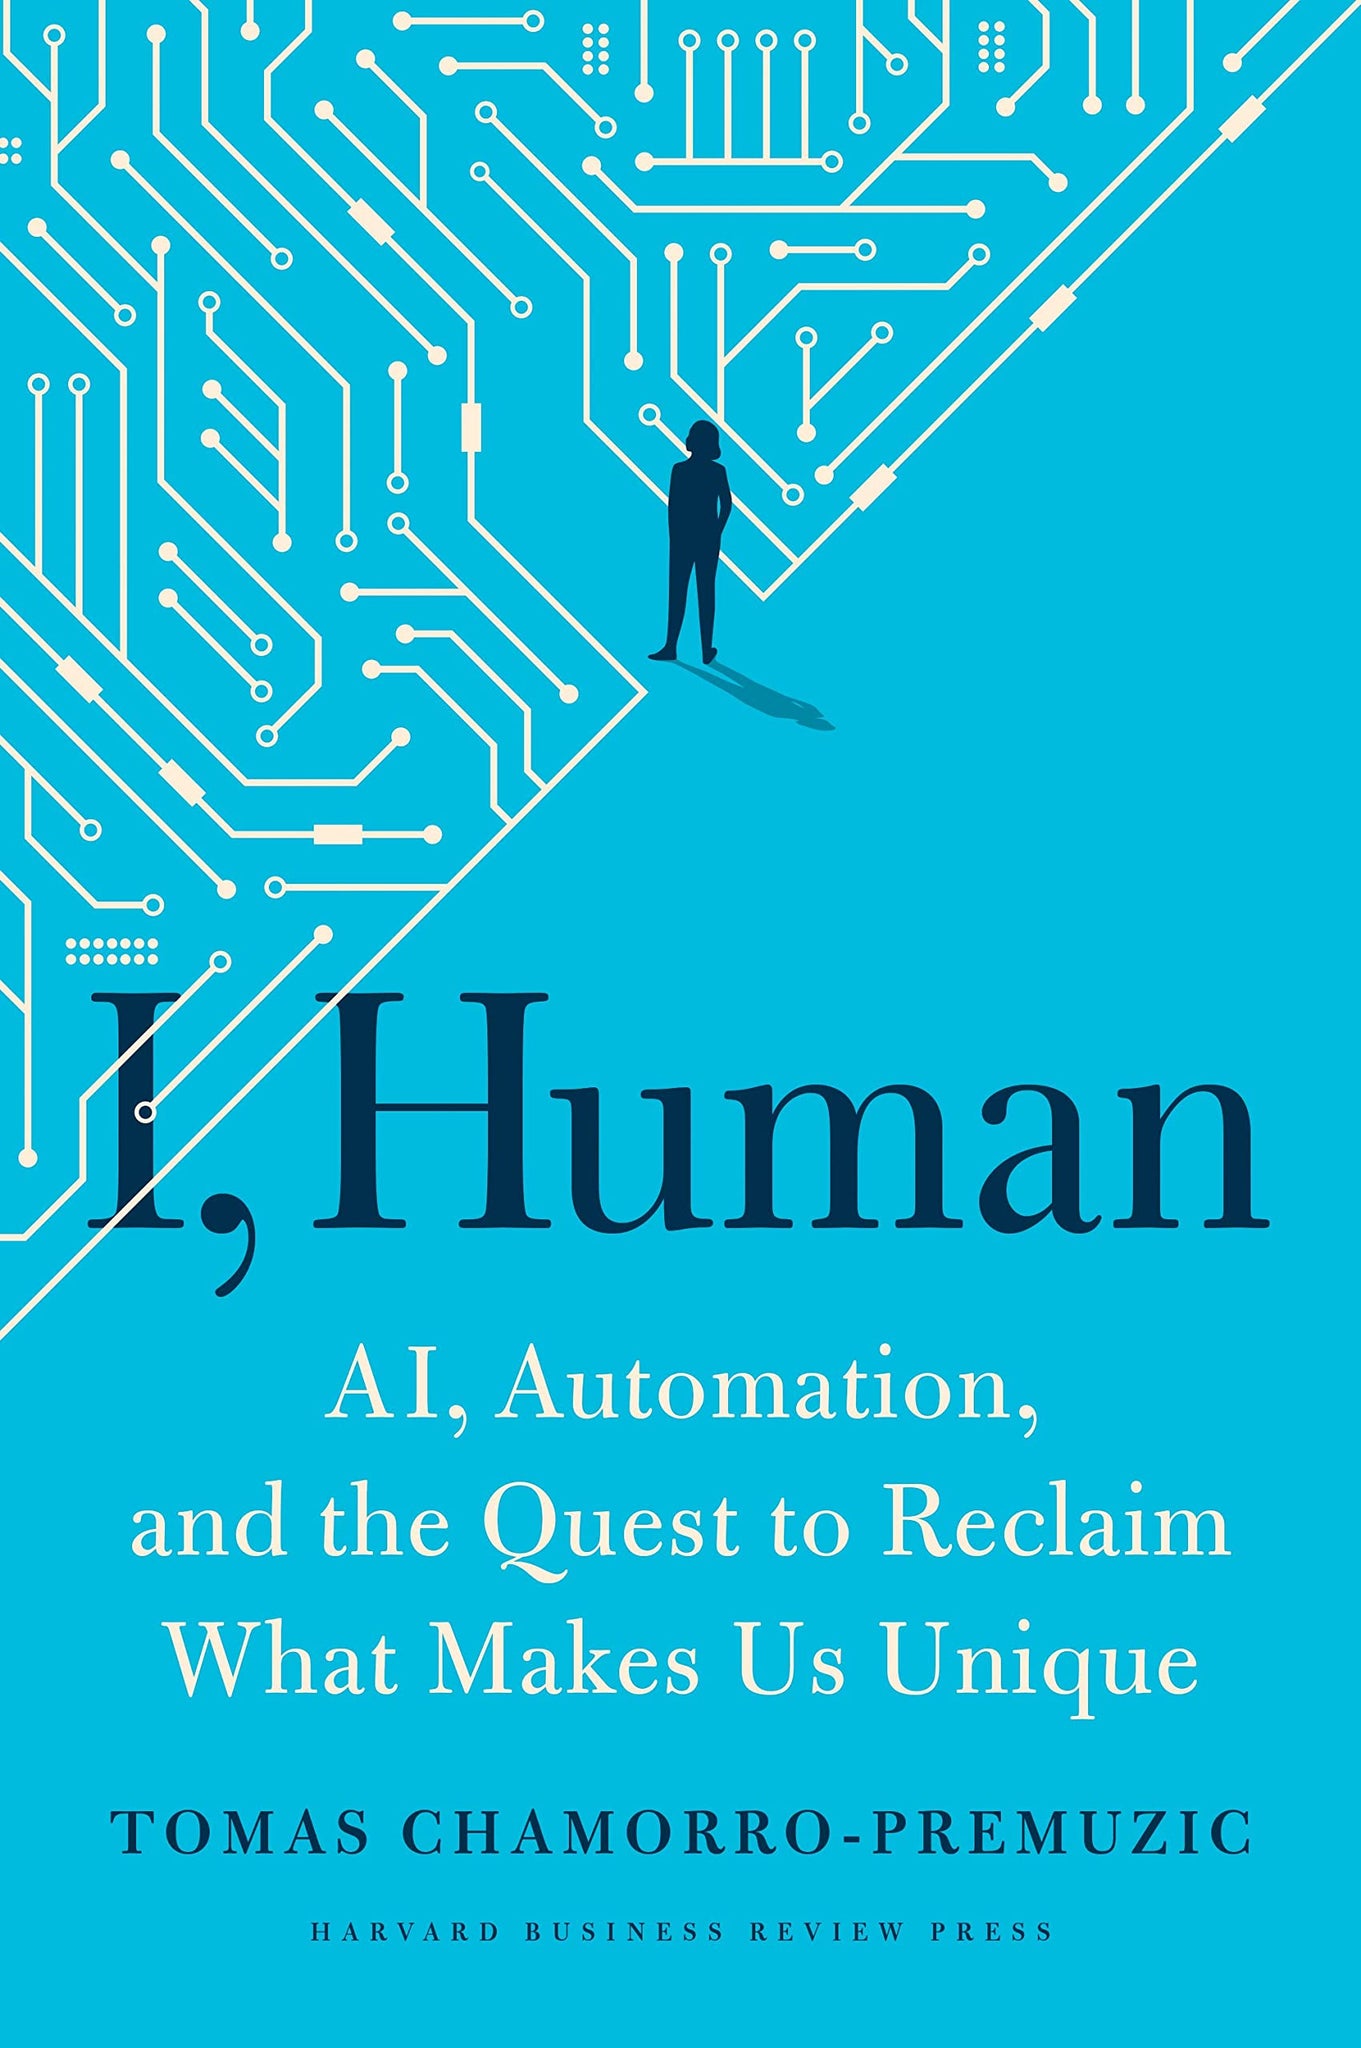 I, Human: AI, Automation, And The Quest To Reclaim What Makes Us Unique